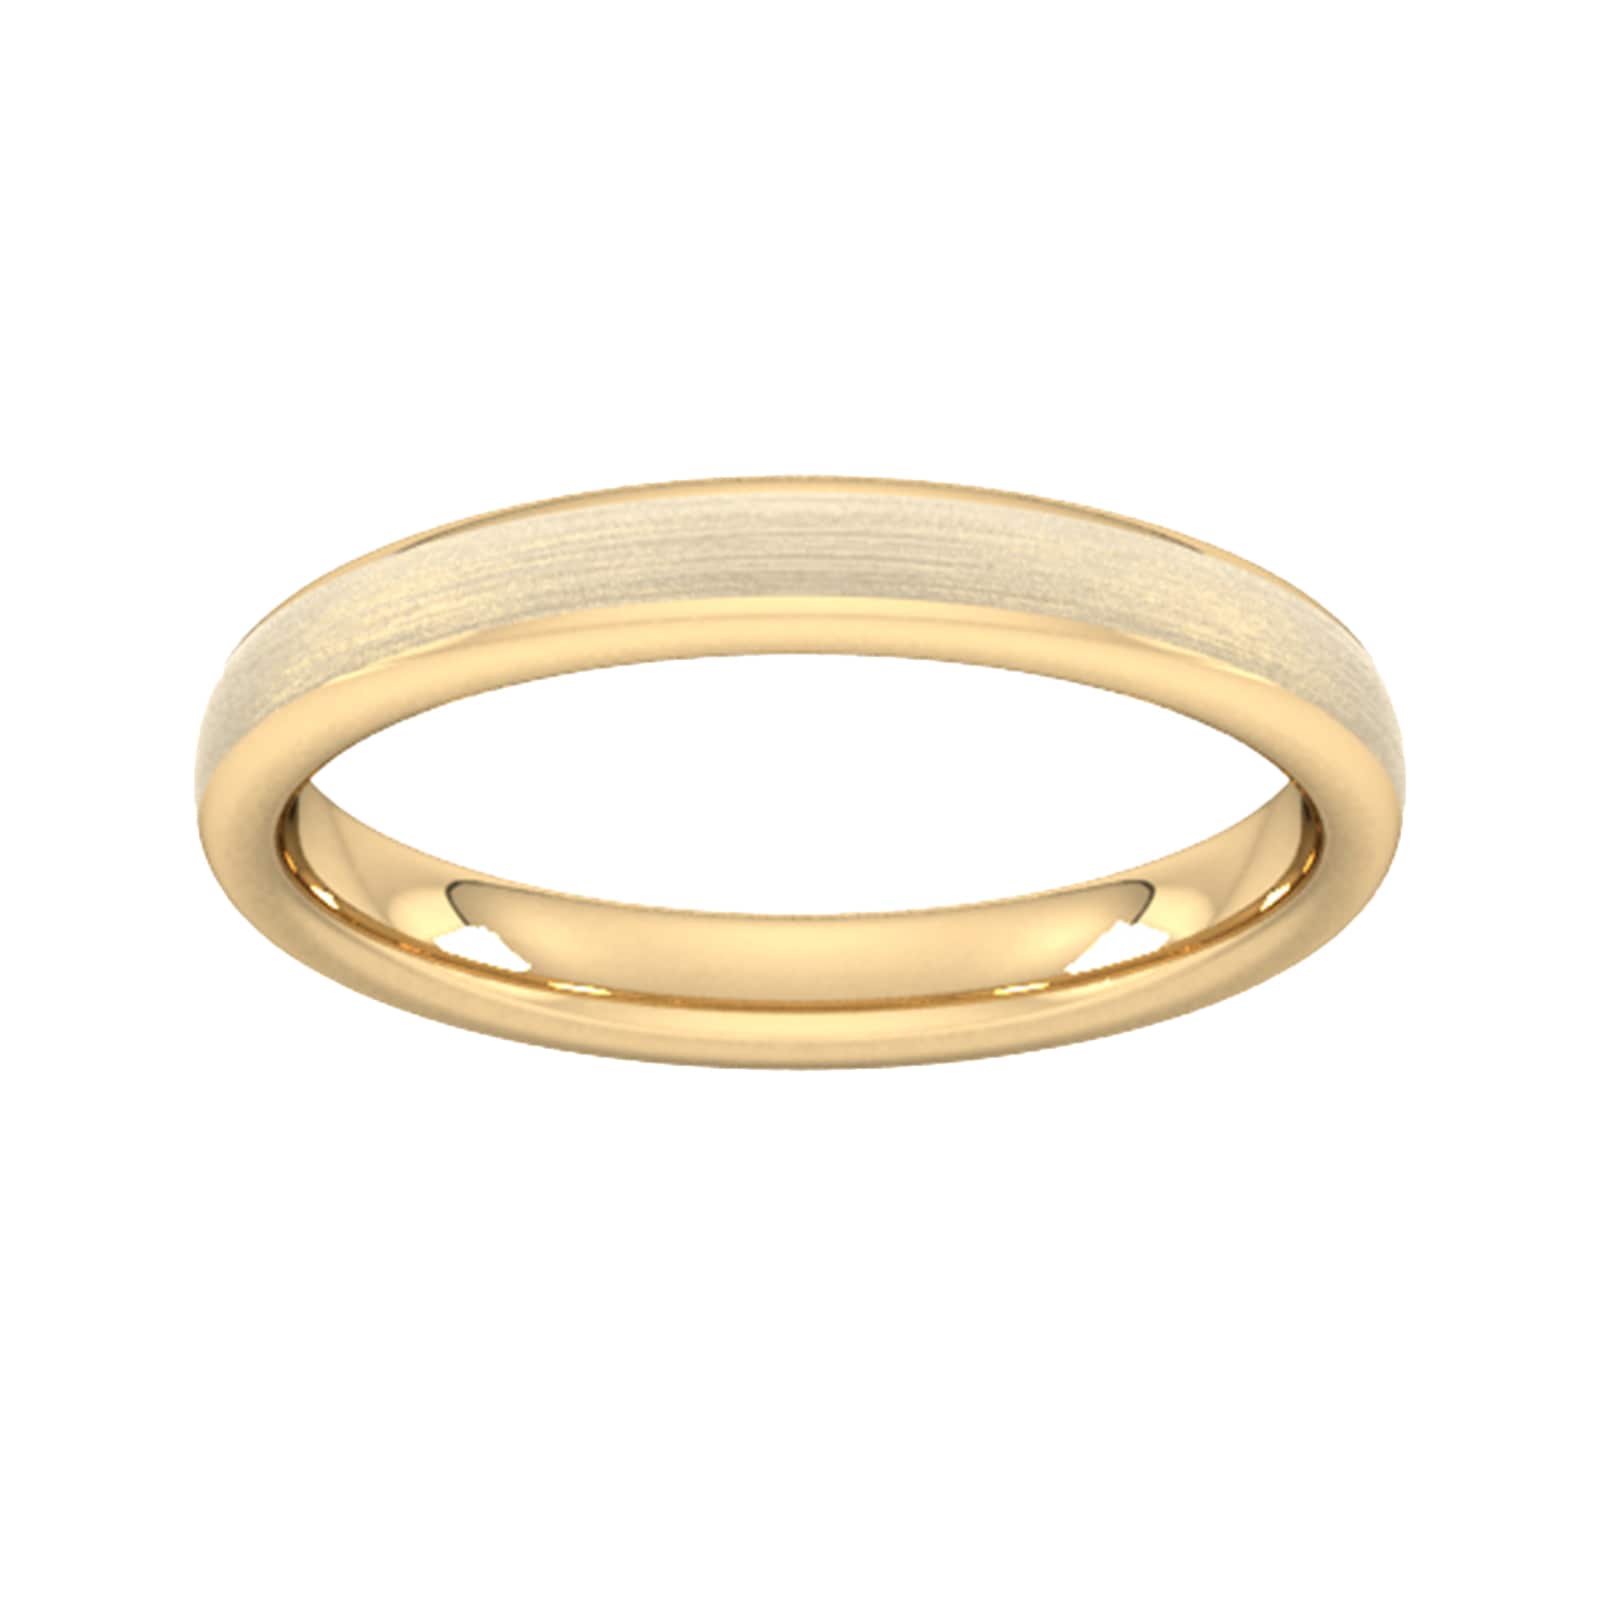 3mm Flat Court Heavy Matt Finished Wedding Ring In 18 Carat Yellow Gold - Ring Size M